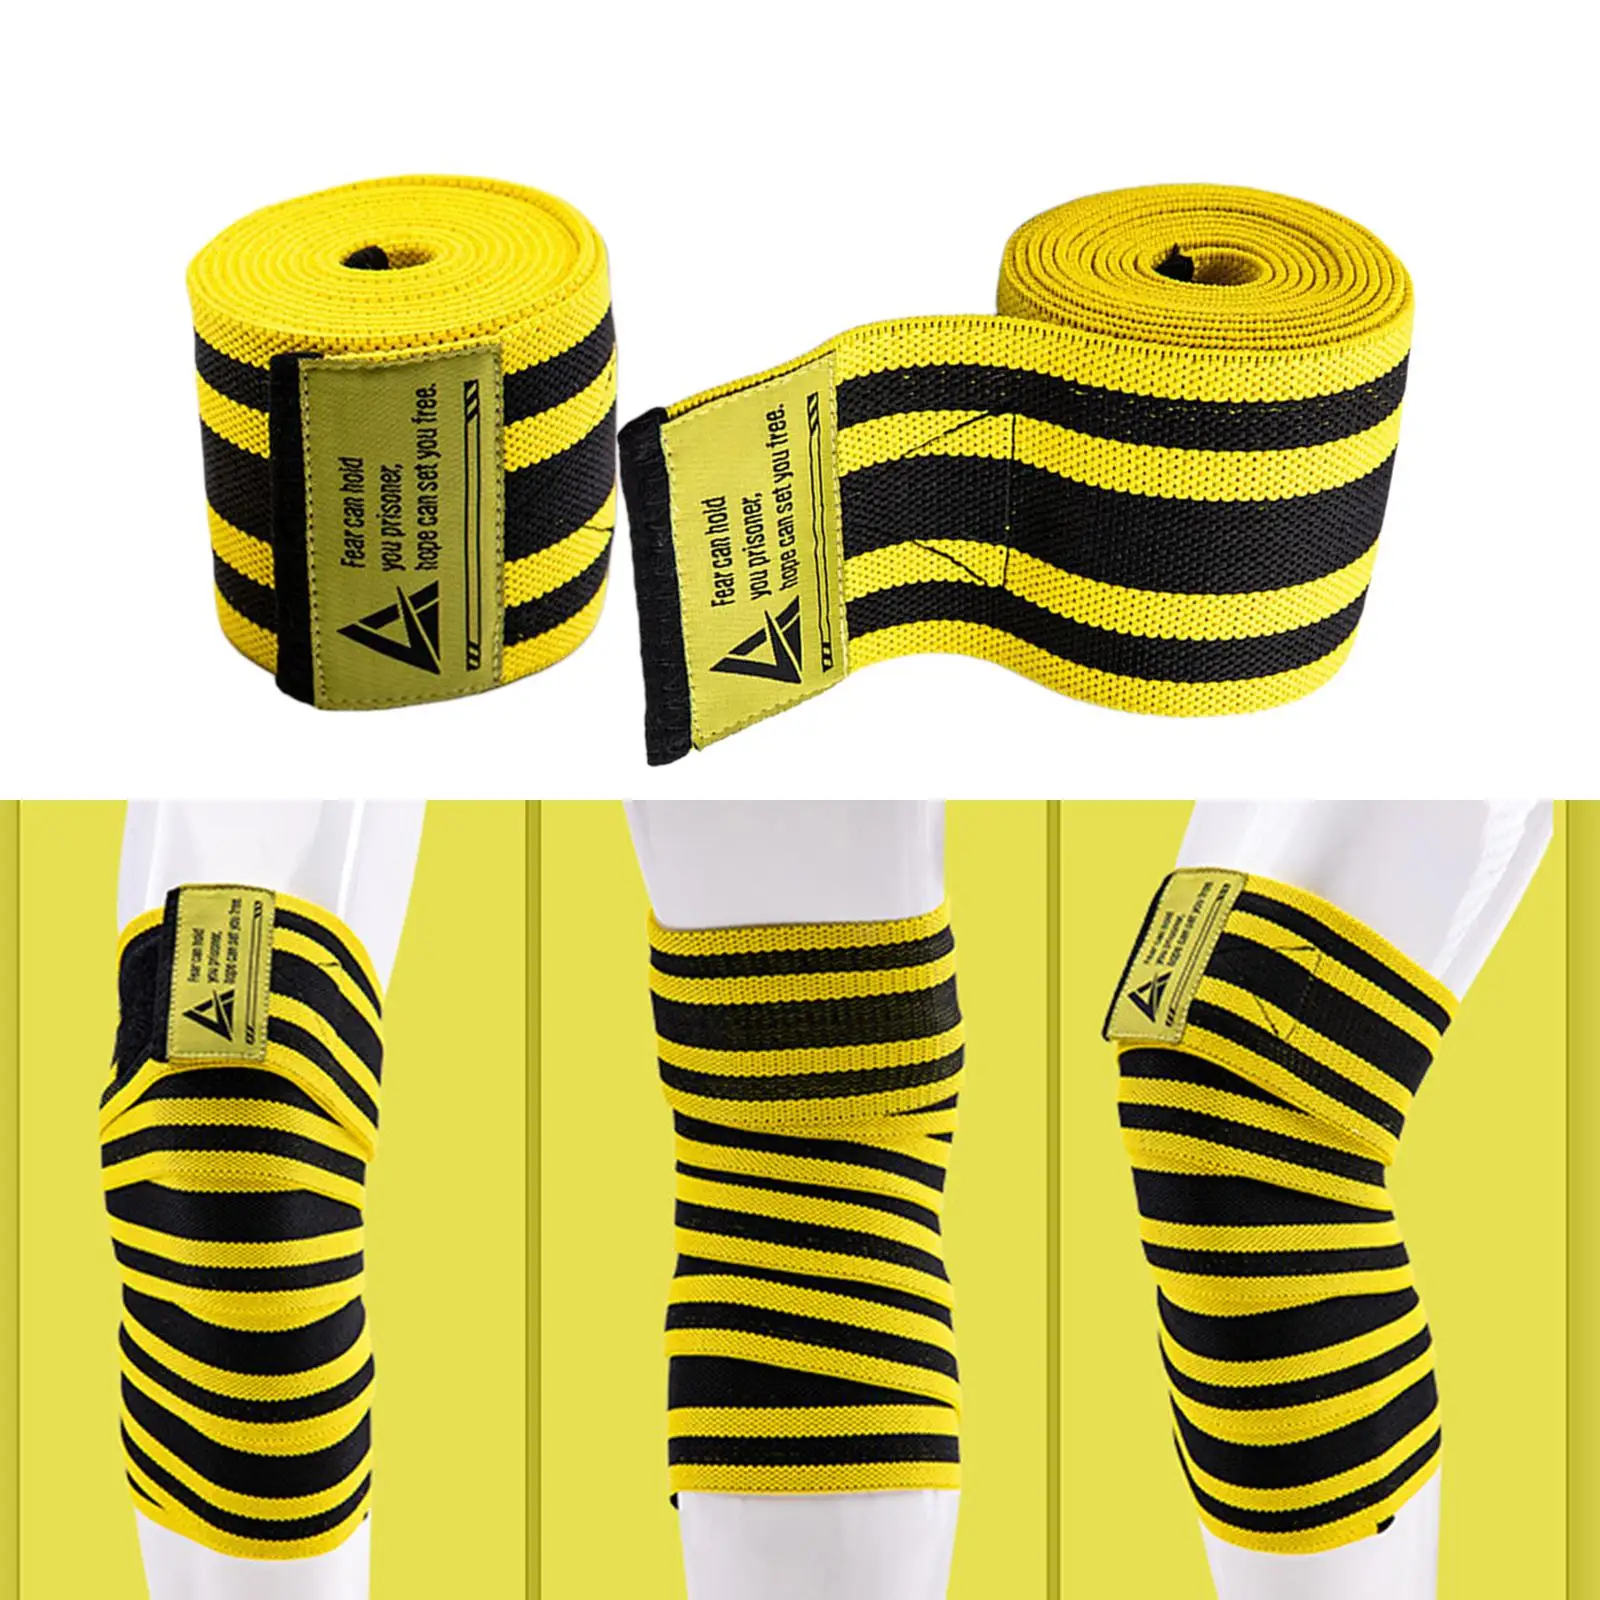 Knee Wraps Compression and Elastic for Men Women 79 inch Knee Support for Running Cable Machines Squats Powerlifting Gym Workout